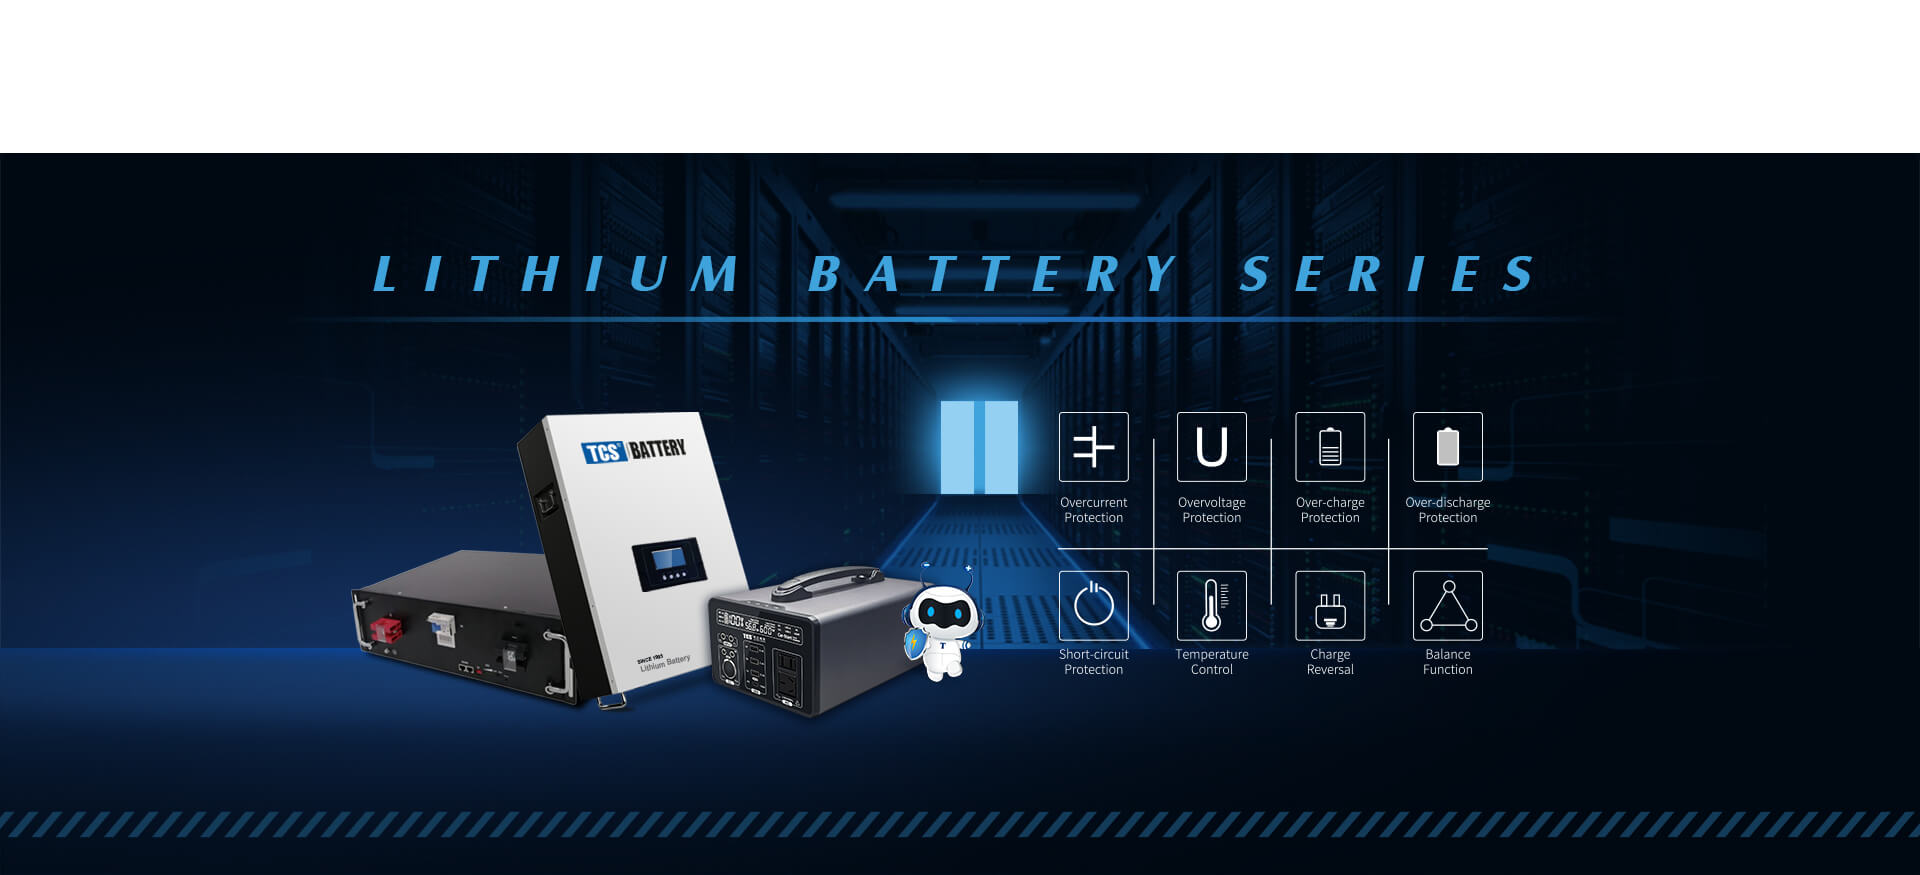 https://www.songligroup.com/lithium-battery-2/